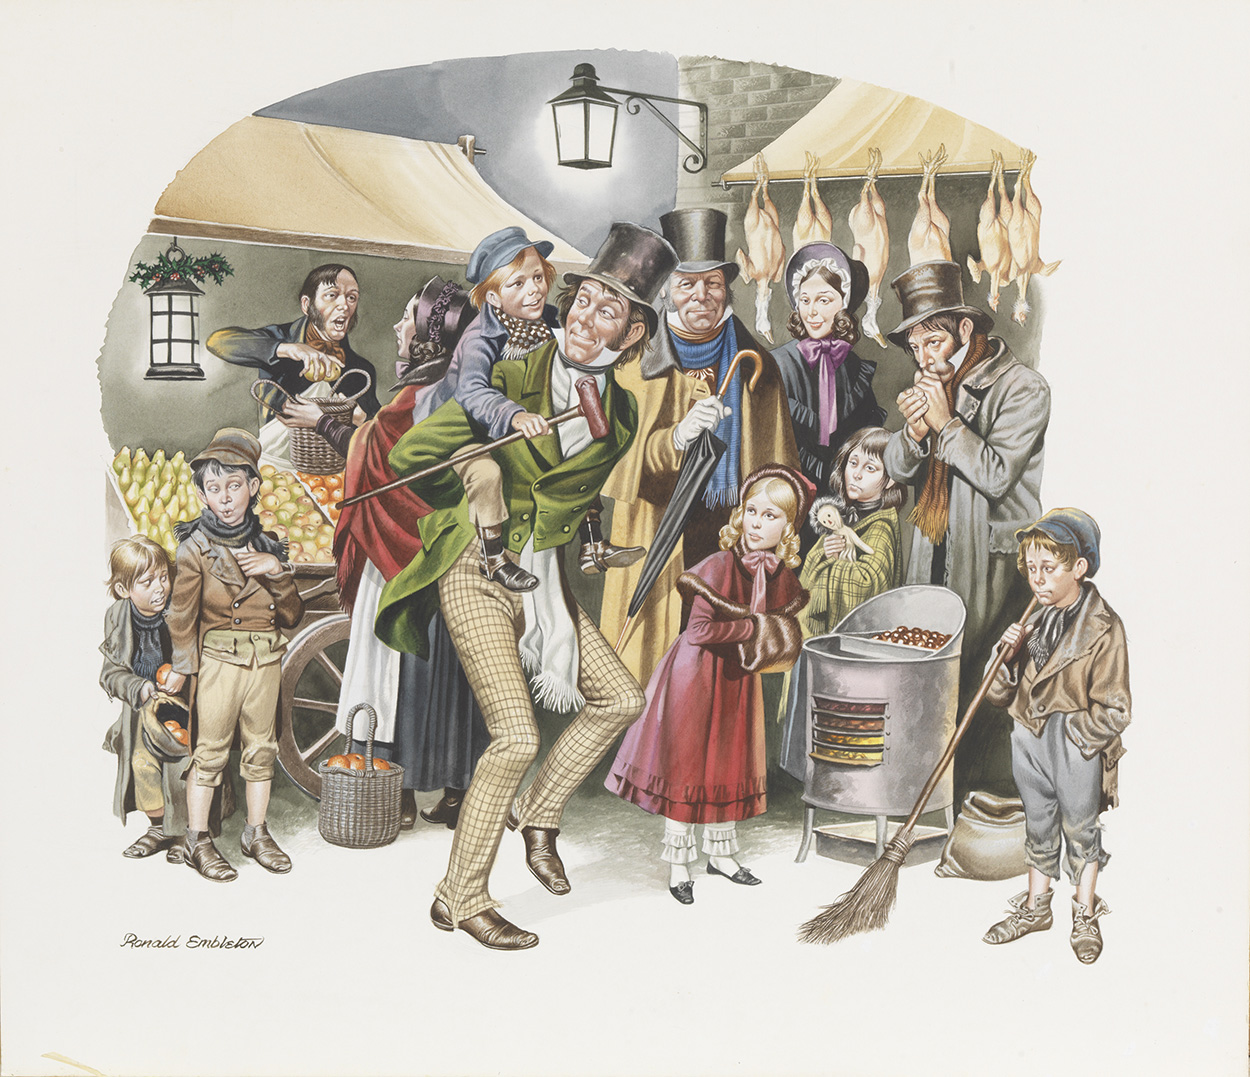 A Christmas Carol (Original) (Signed) art by Charles Dickens (Ron Embleton) at The Illustration Art Gallery